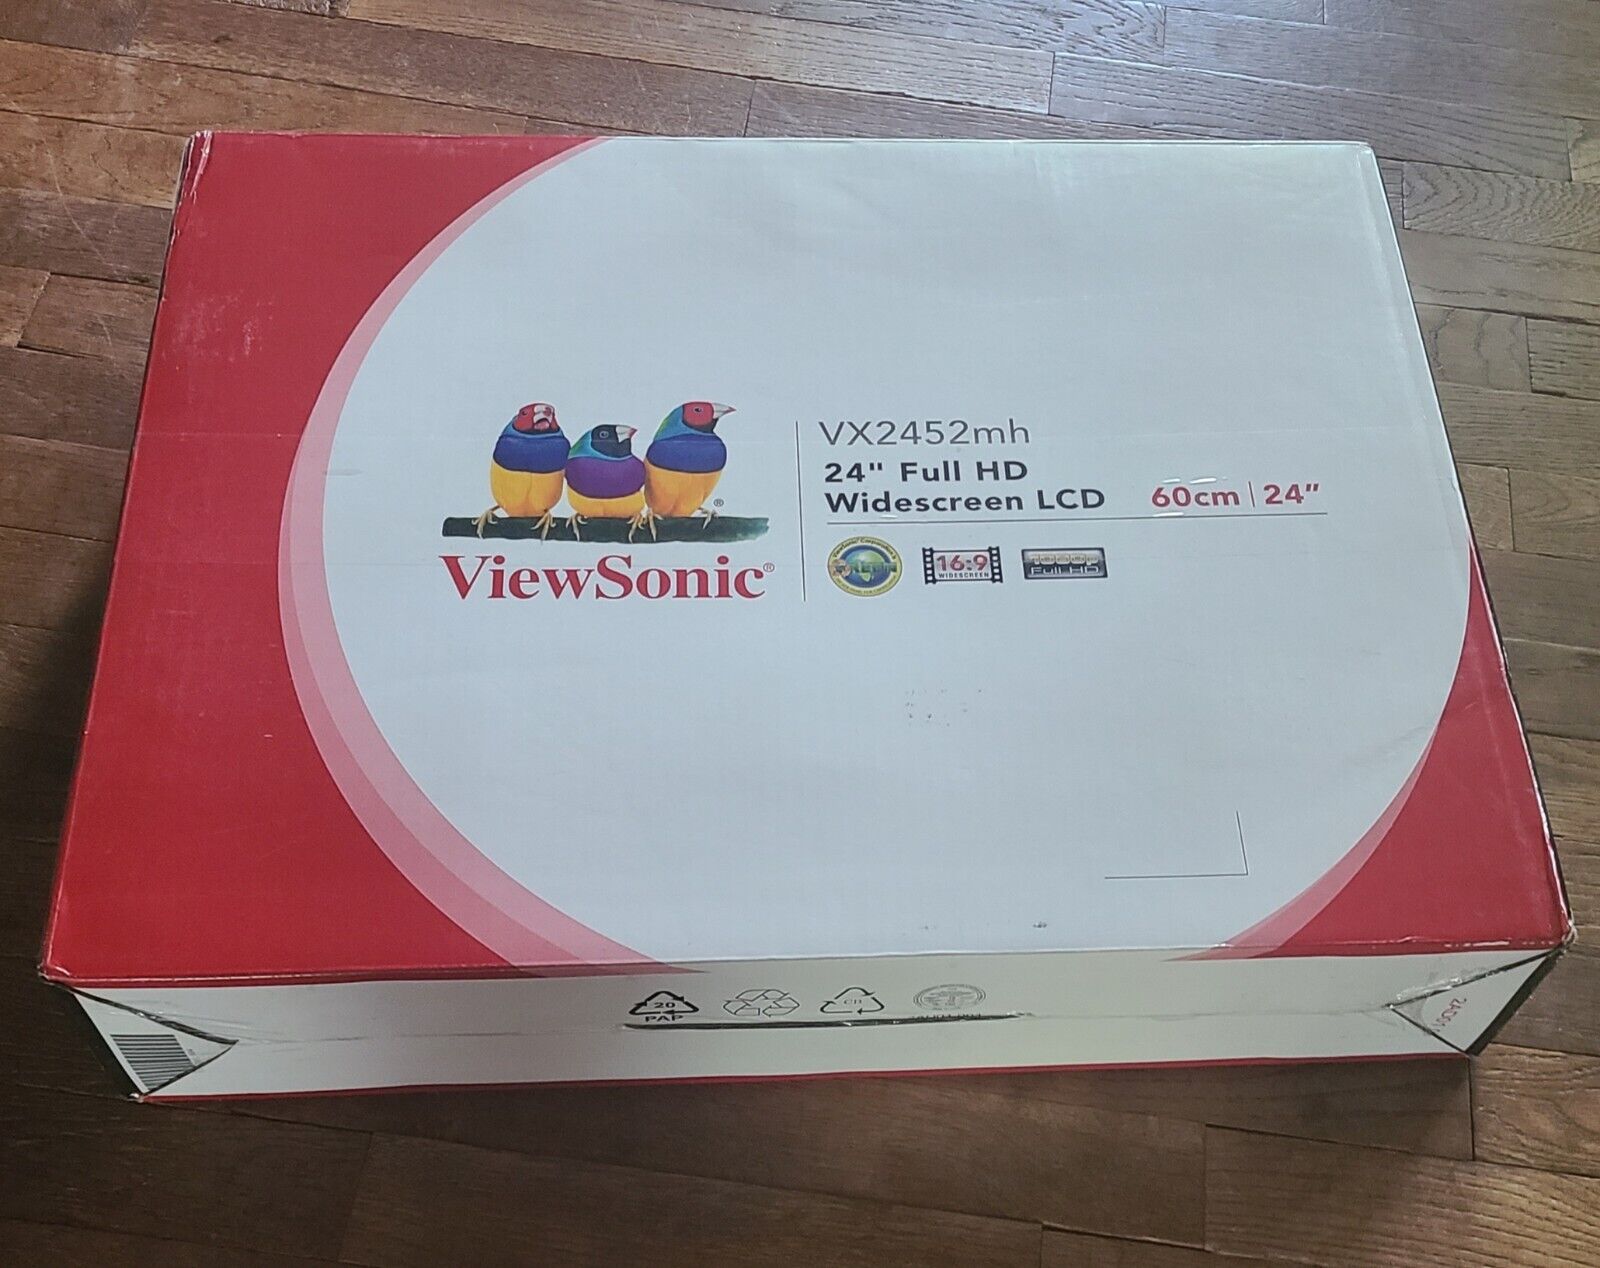 NEW: ViewSonic VX2452mh 24 in Widescreen LCD Monitor